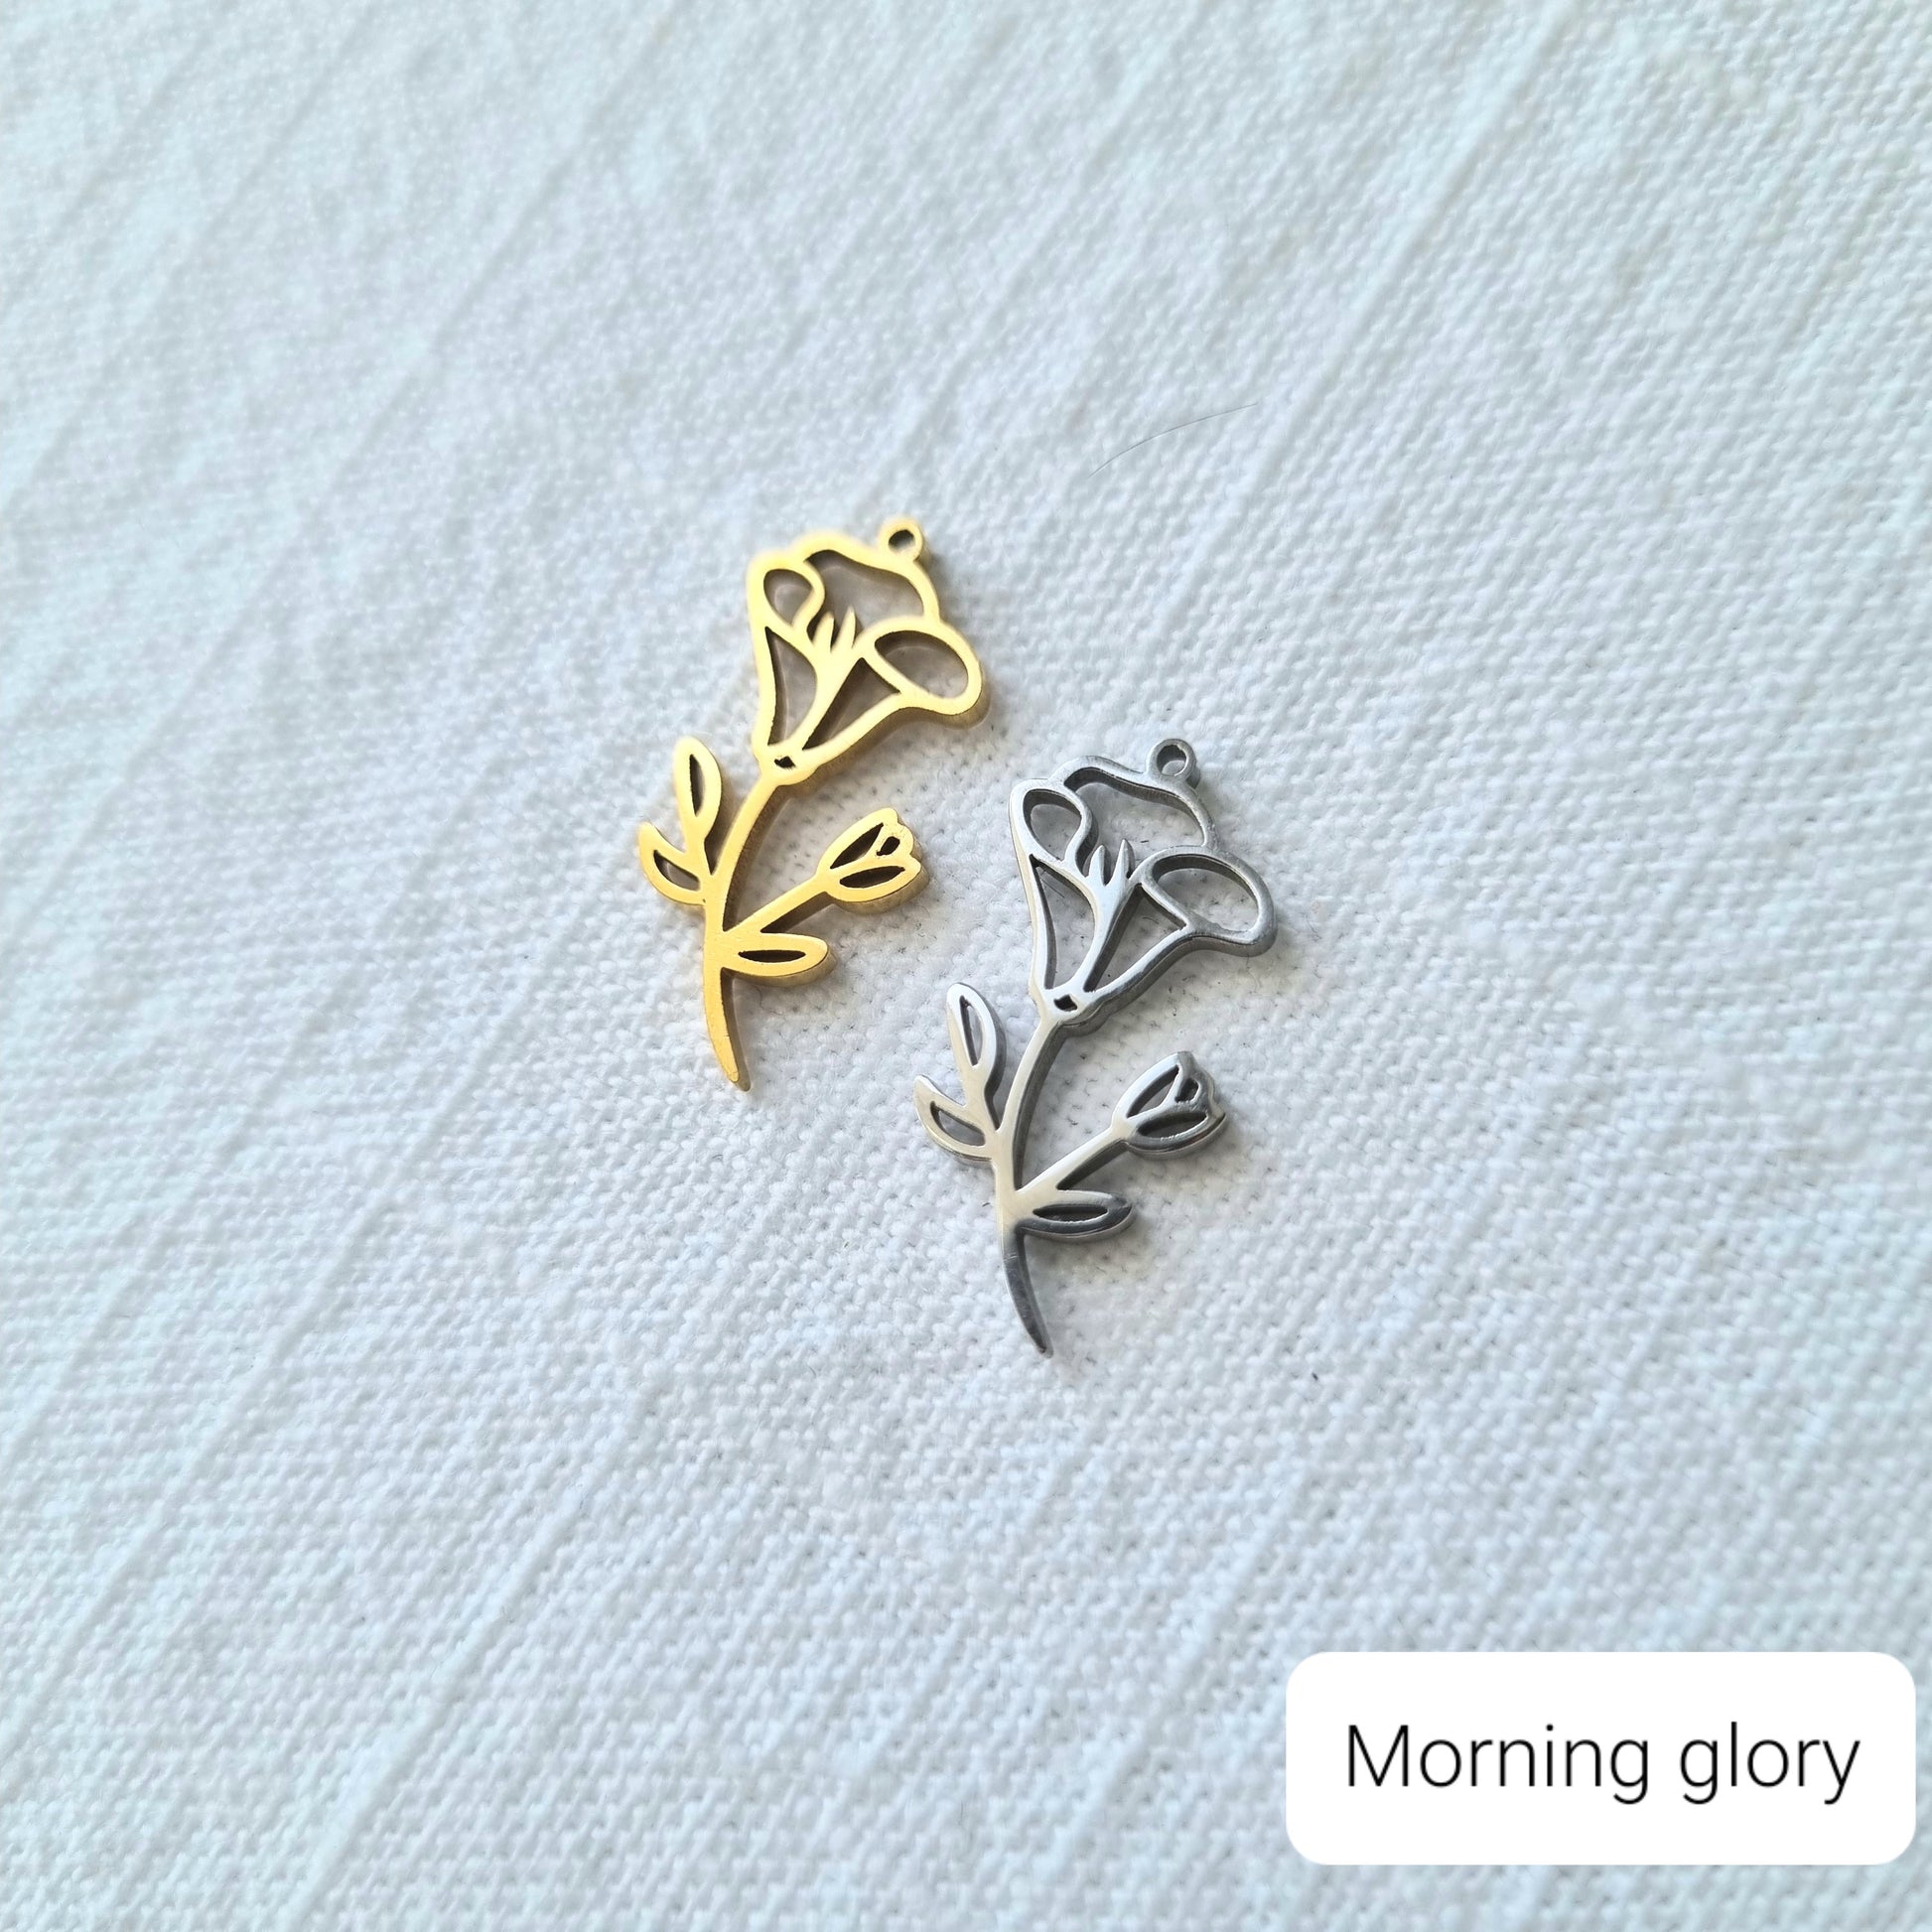 Birth Flower Charm - Stainless Steel - Sparrow and Fox